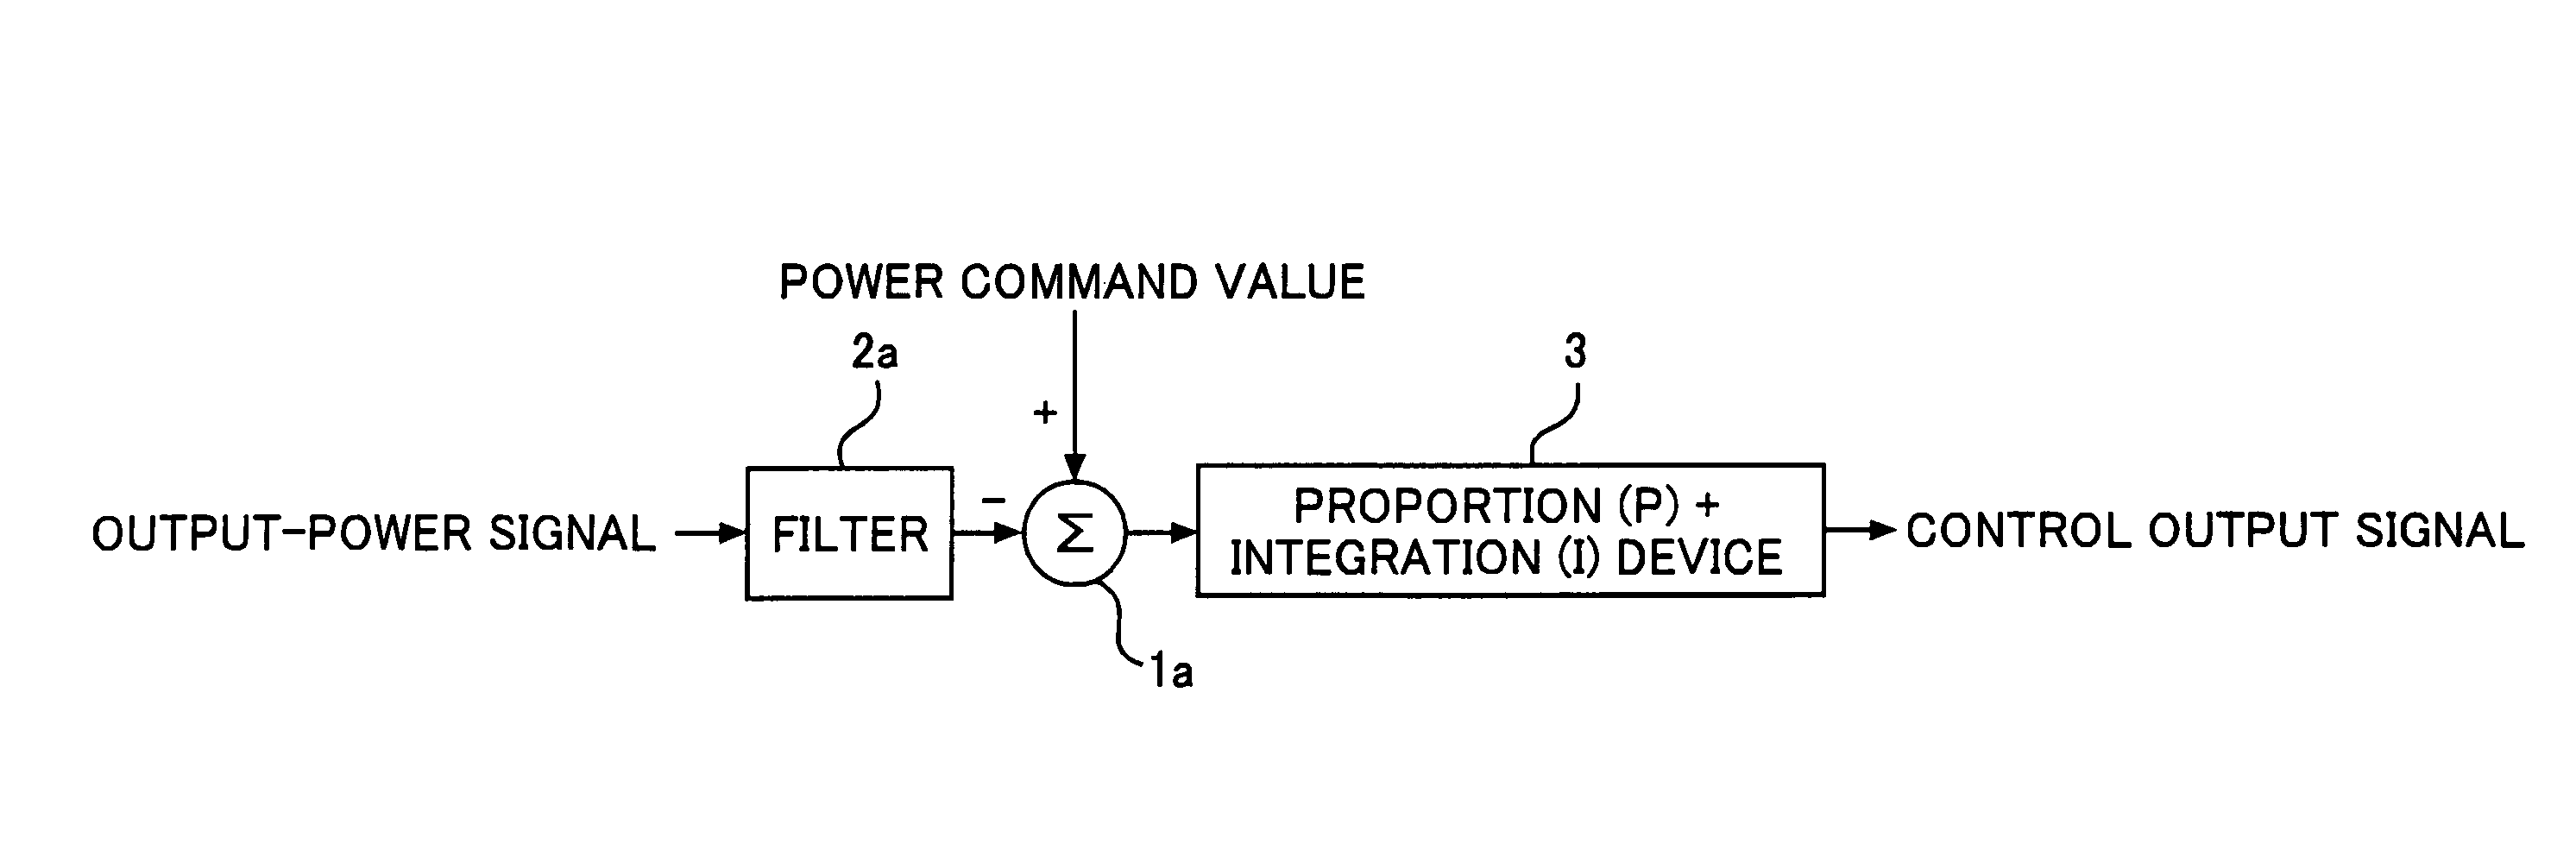 Prime mover output control system